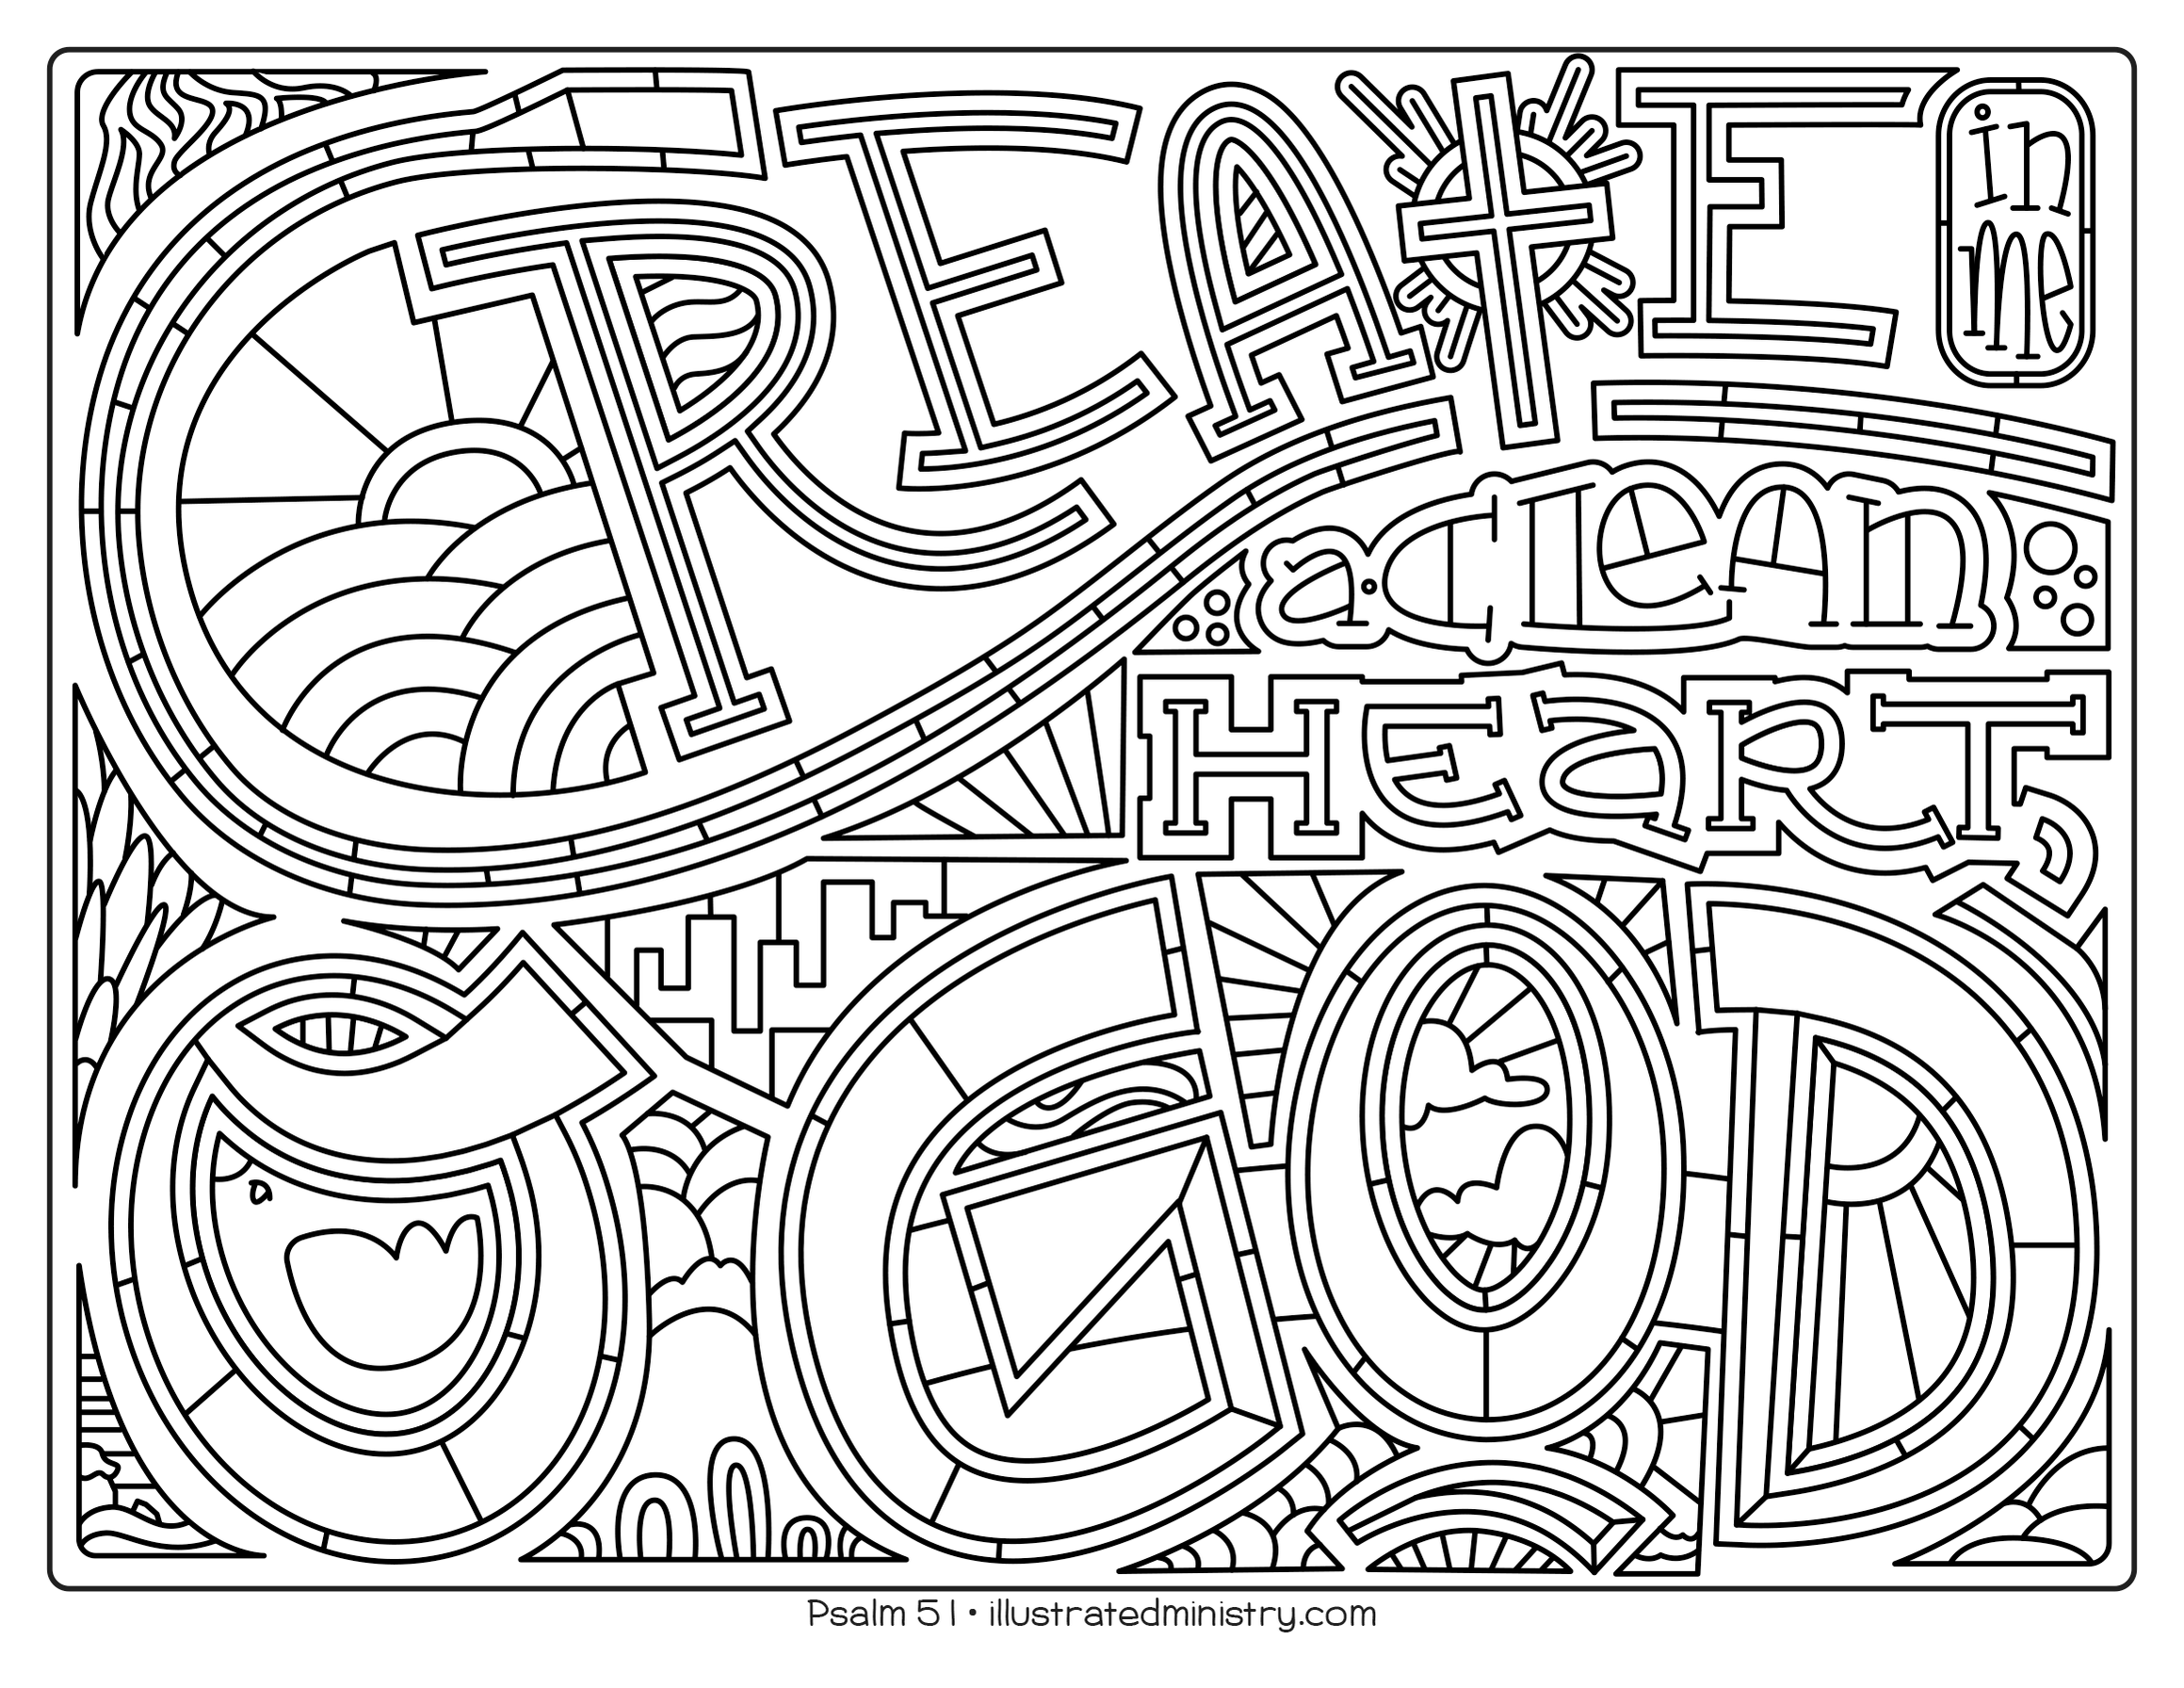 Bible Story Coloring Pages: Spring 2021 — Illustrated Ministry